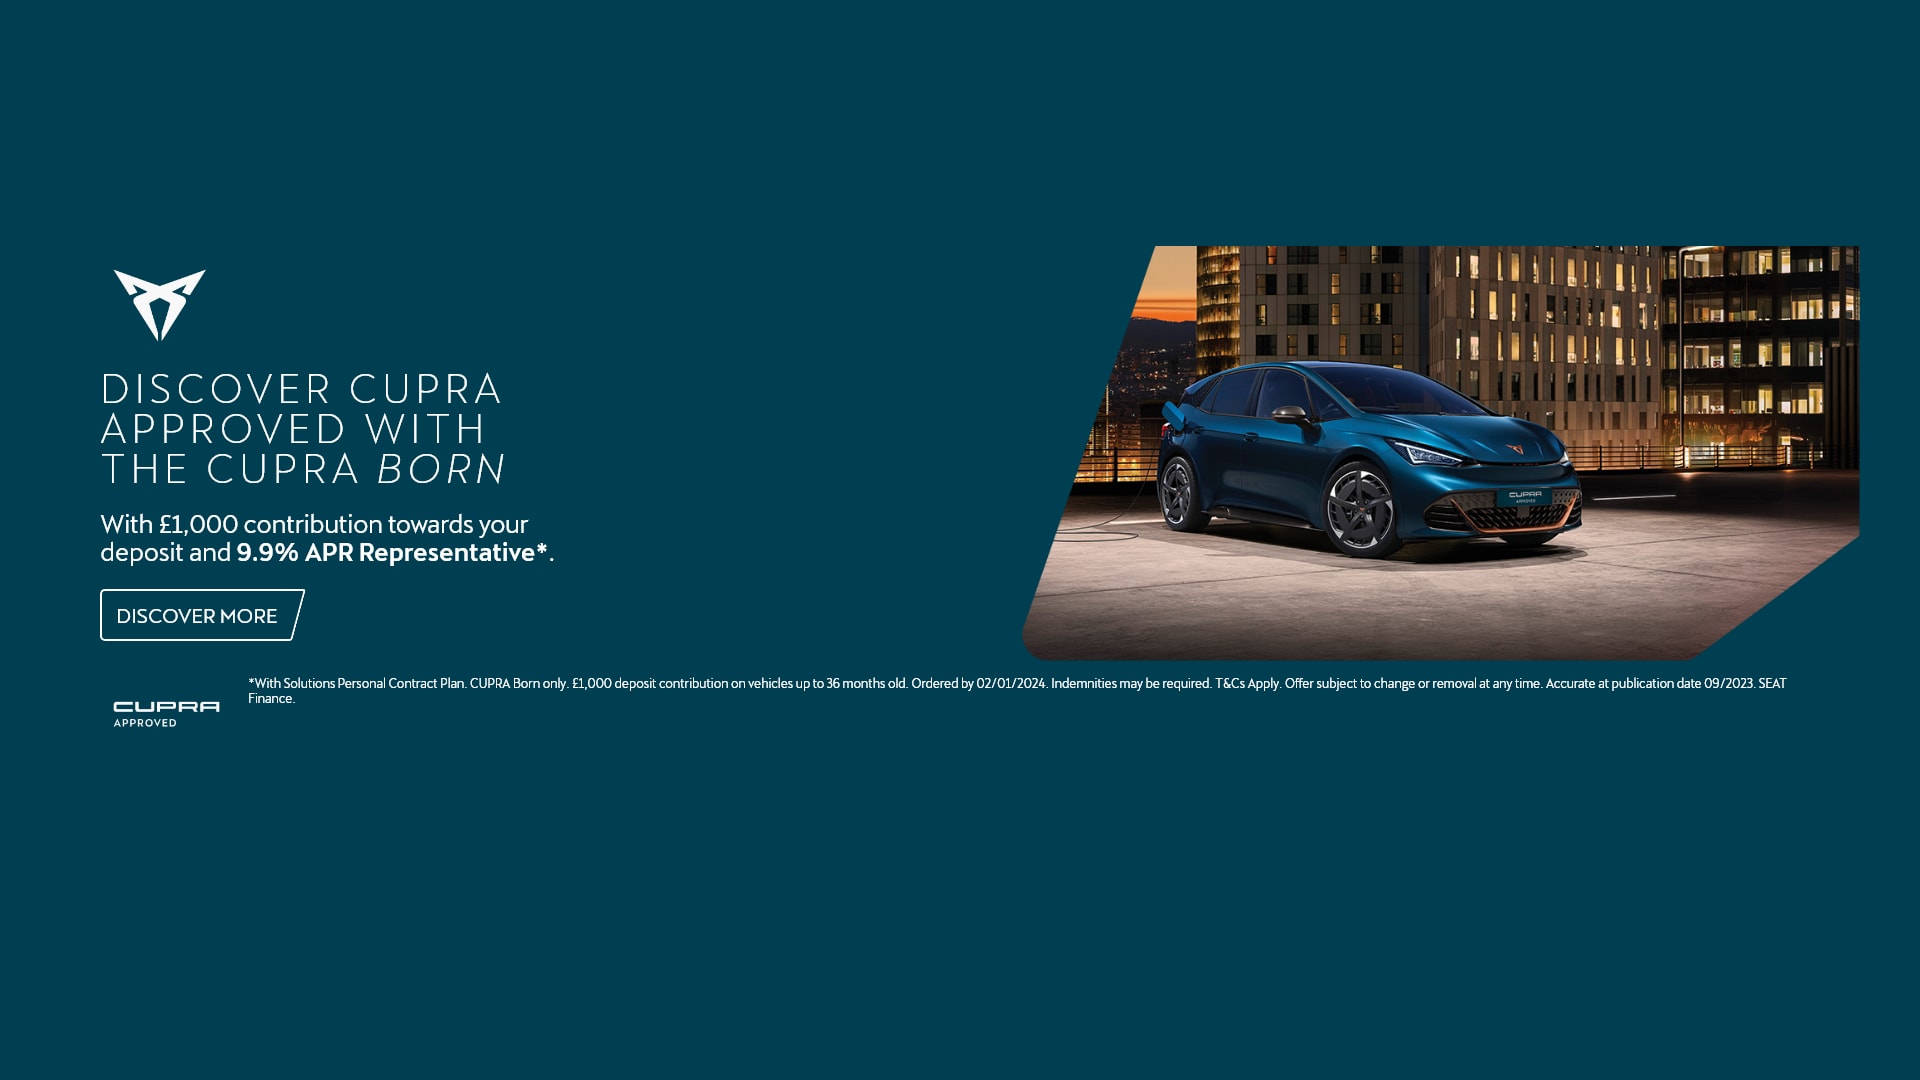 DISCOVER CUPRA APPROVED WITH